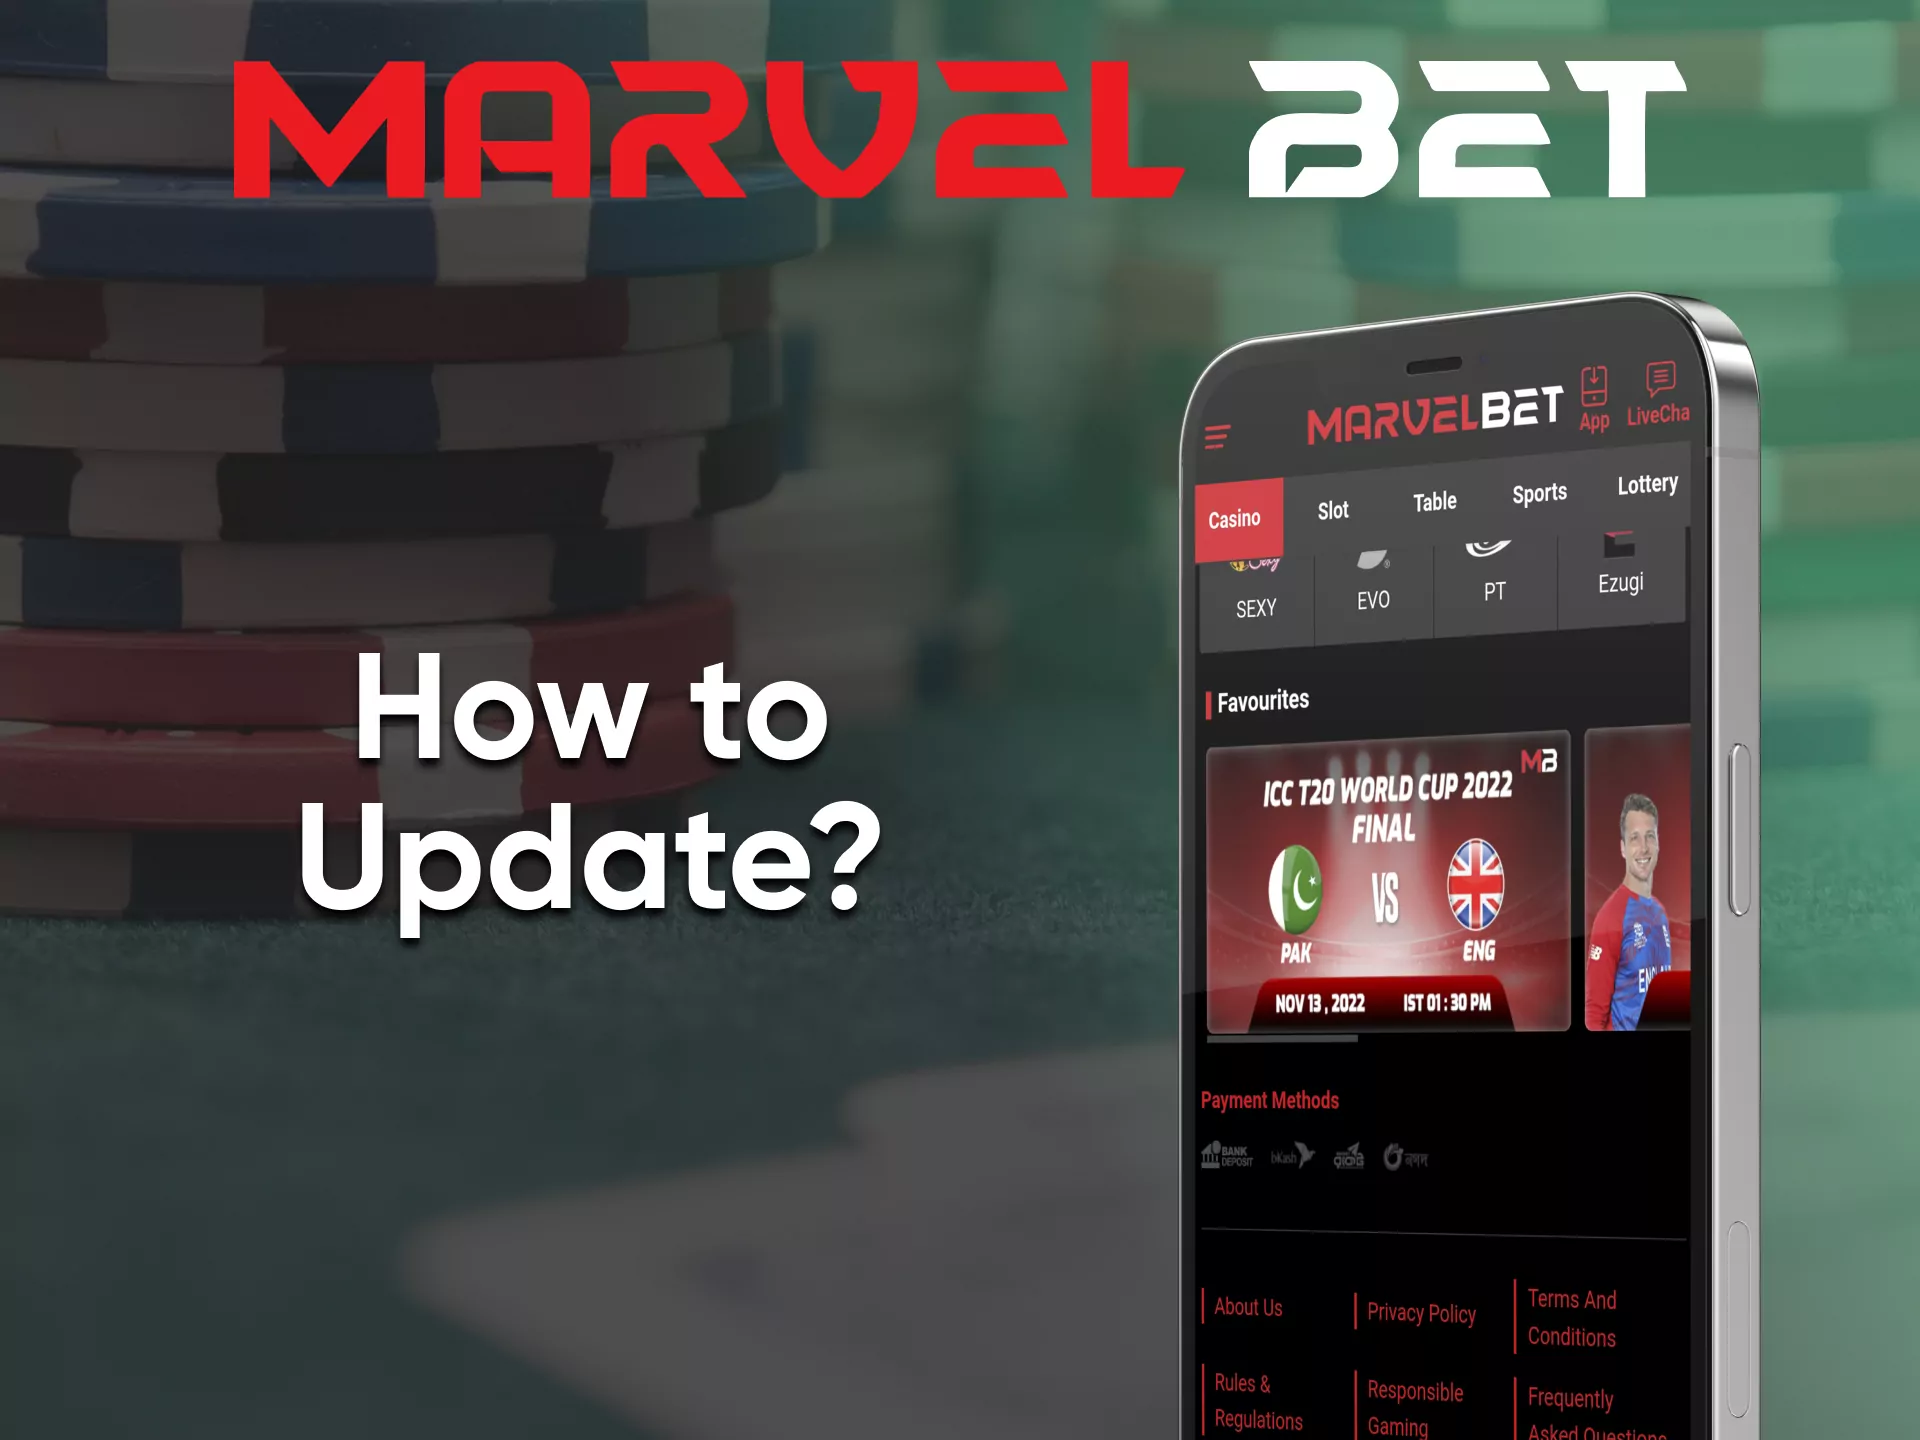 Update the application for the quality work of the casino from Marvelbet.